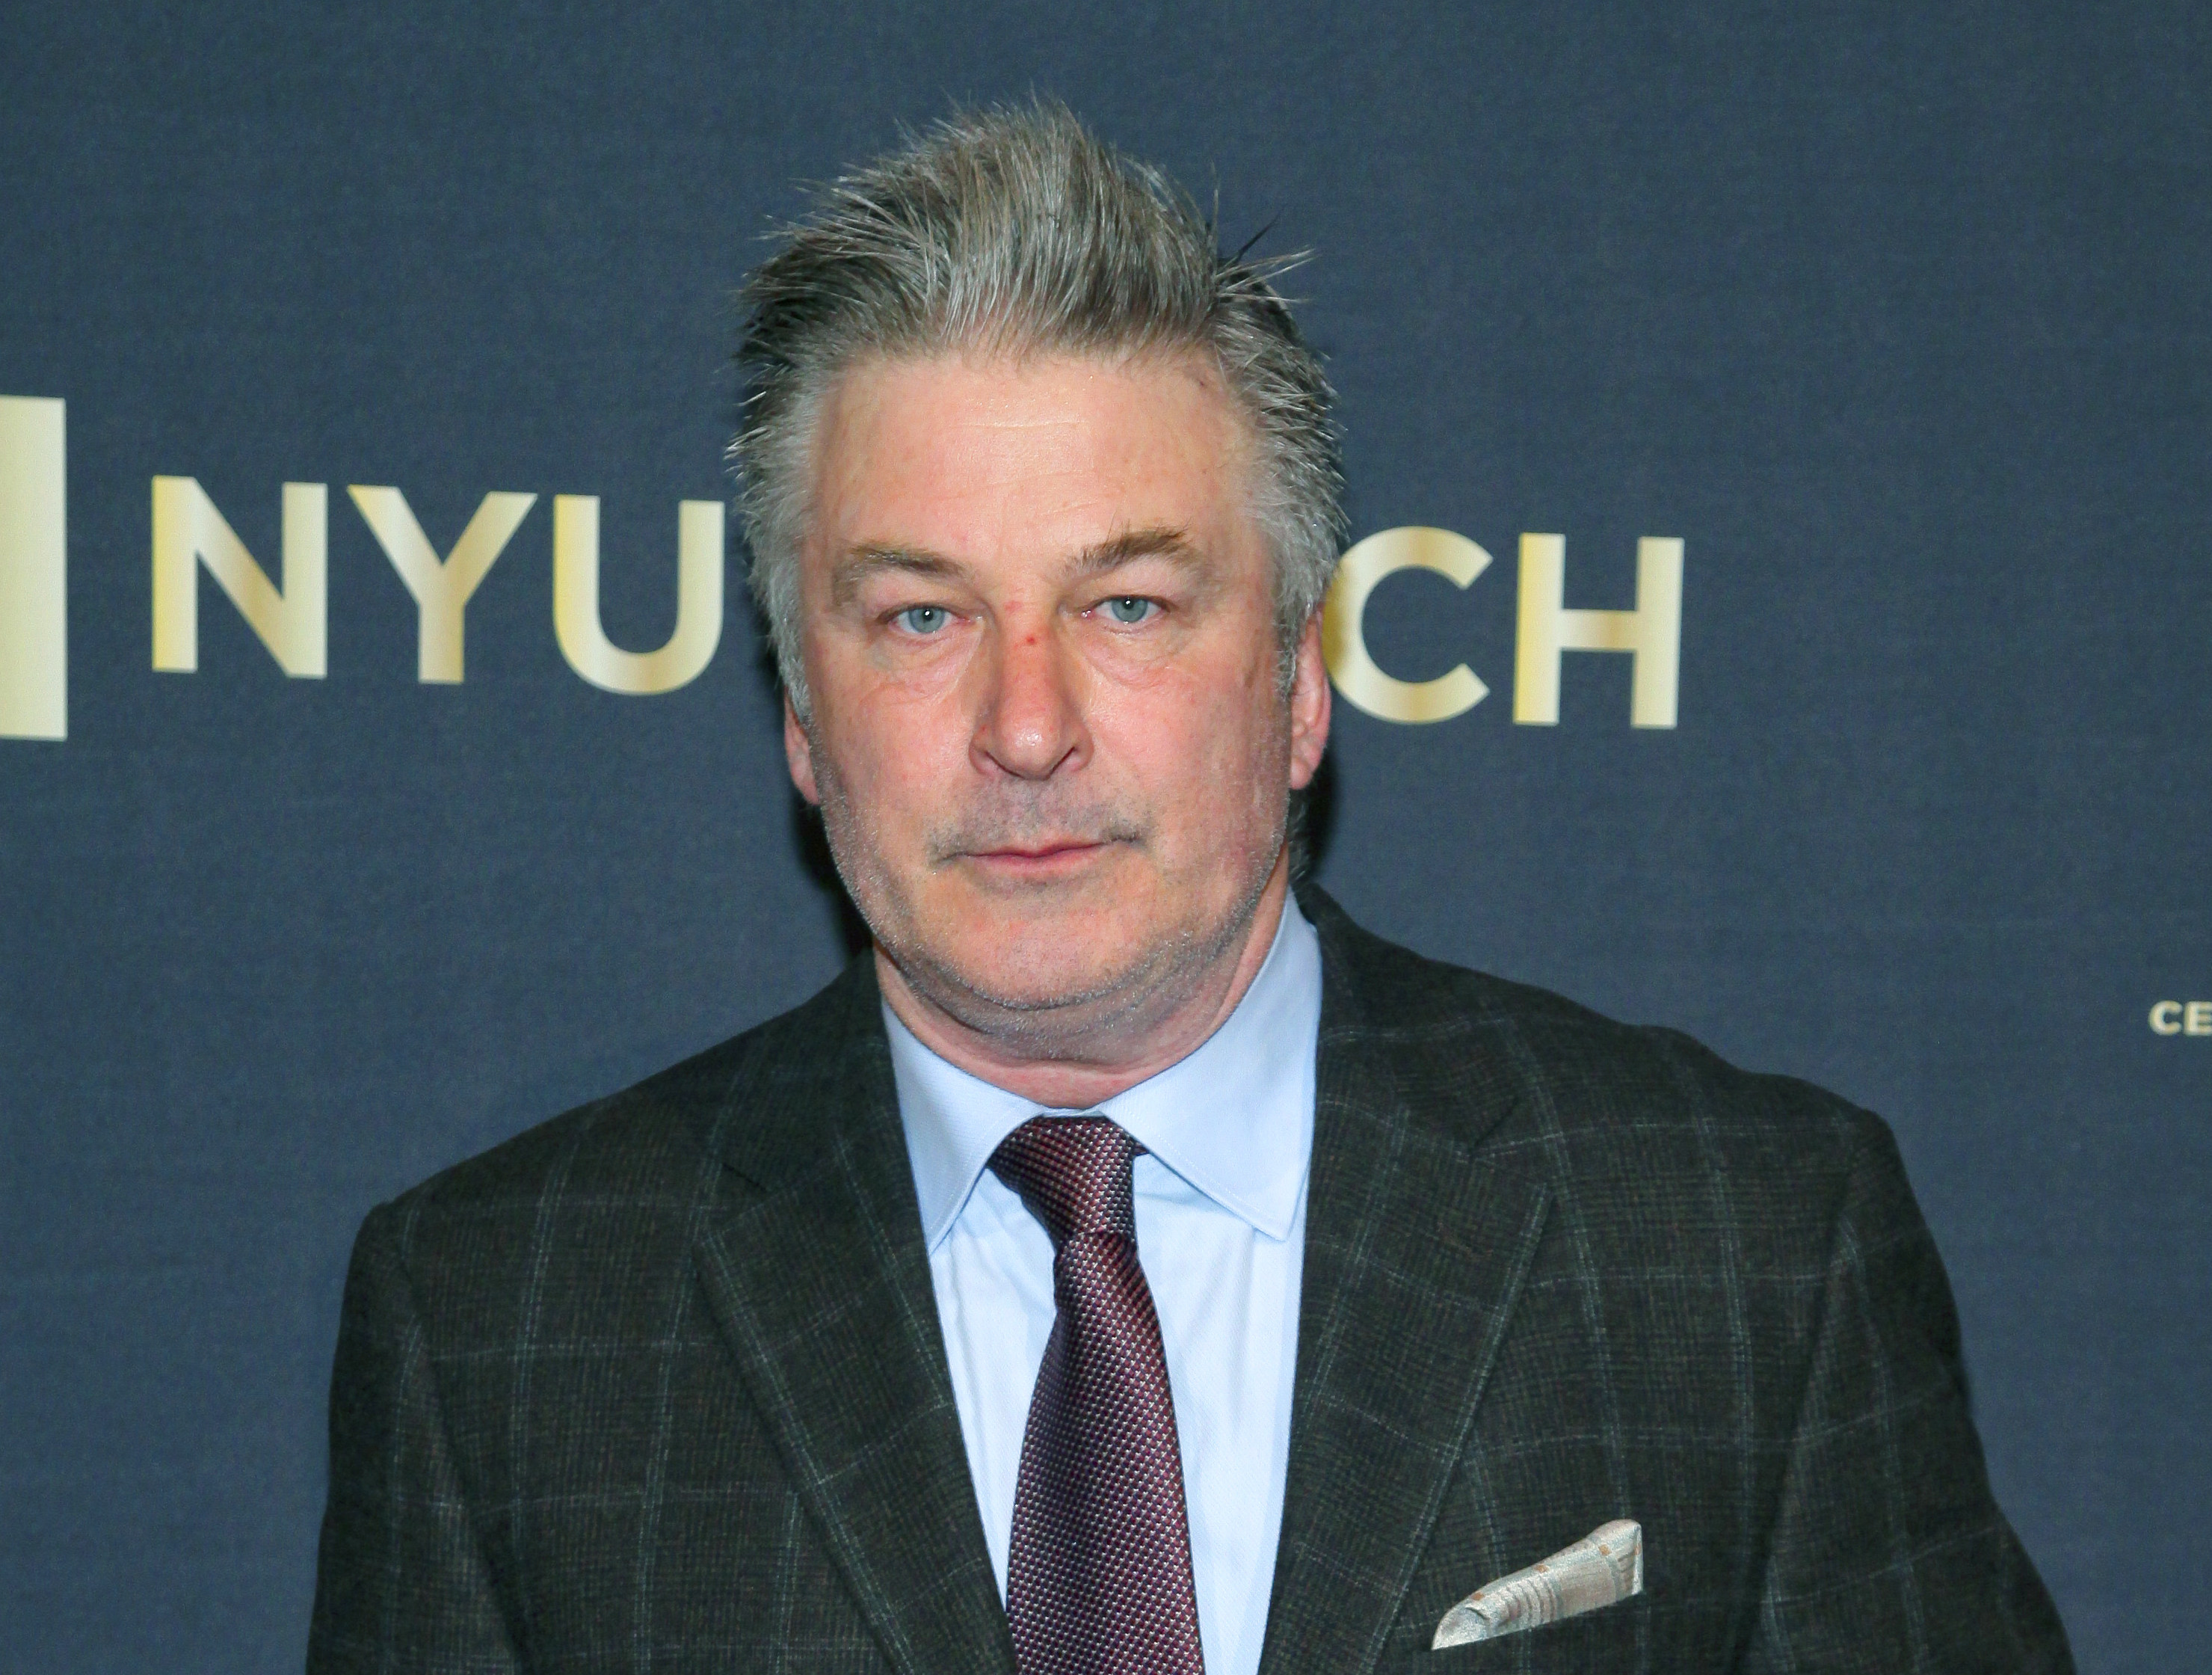 Alec Baldwin attends an event in New York in April 2016. Photo: AP